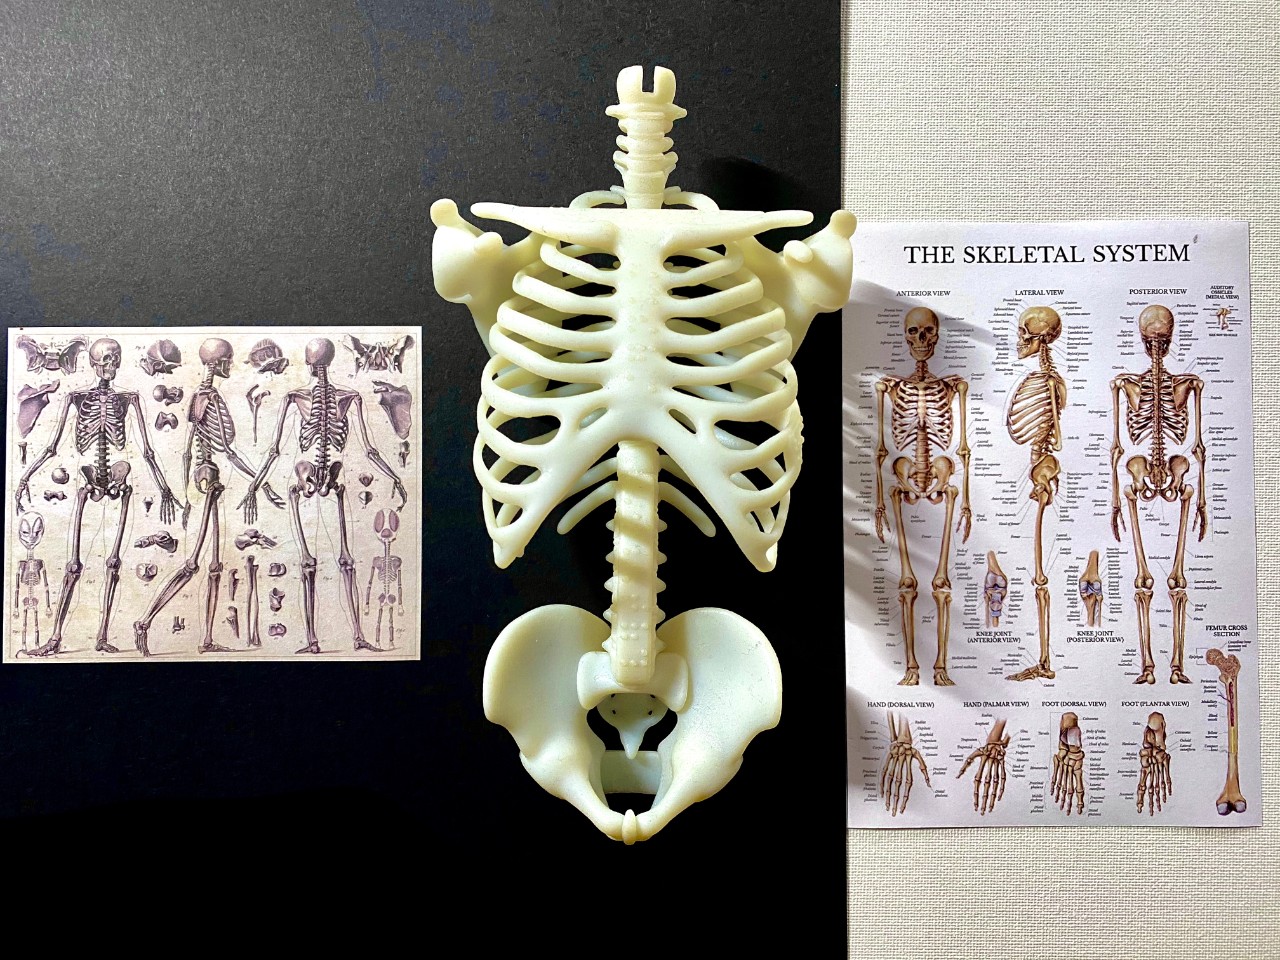 3D model of a partial skeleton, with skeleton images on either sides